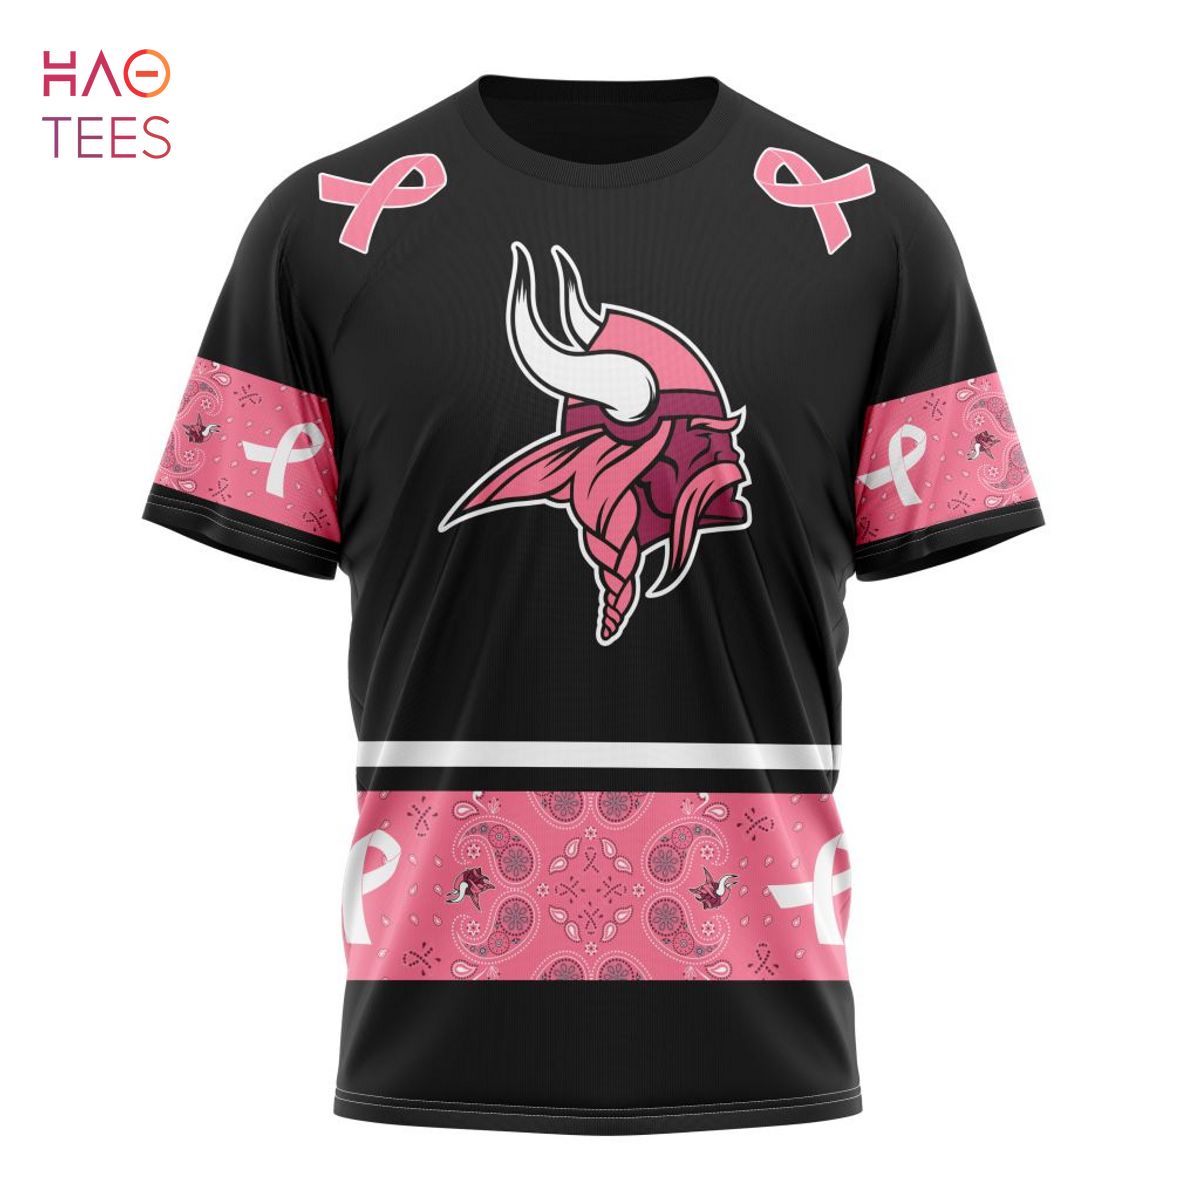 BEST NFL Minnesota Vikings, Specialized Design In Classic Style With Paisley! IN OCTOBER WE WEAR PINK BREAST CANCER 3D Hoodie